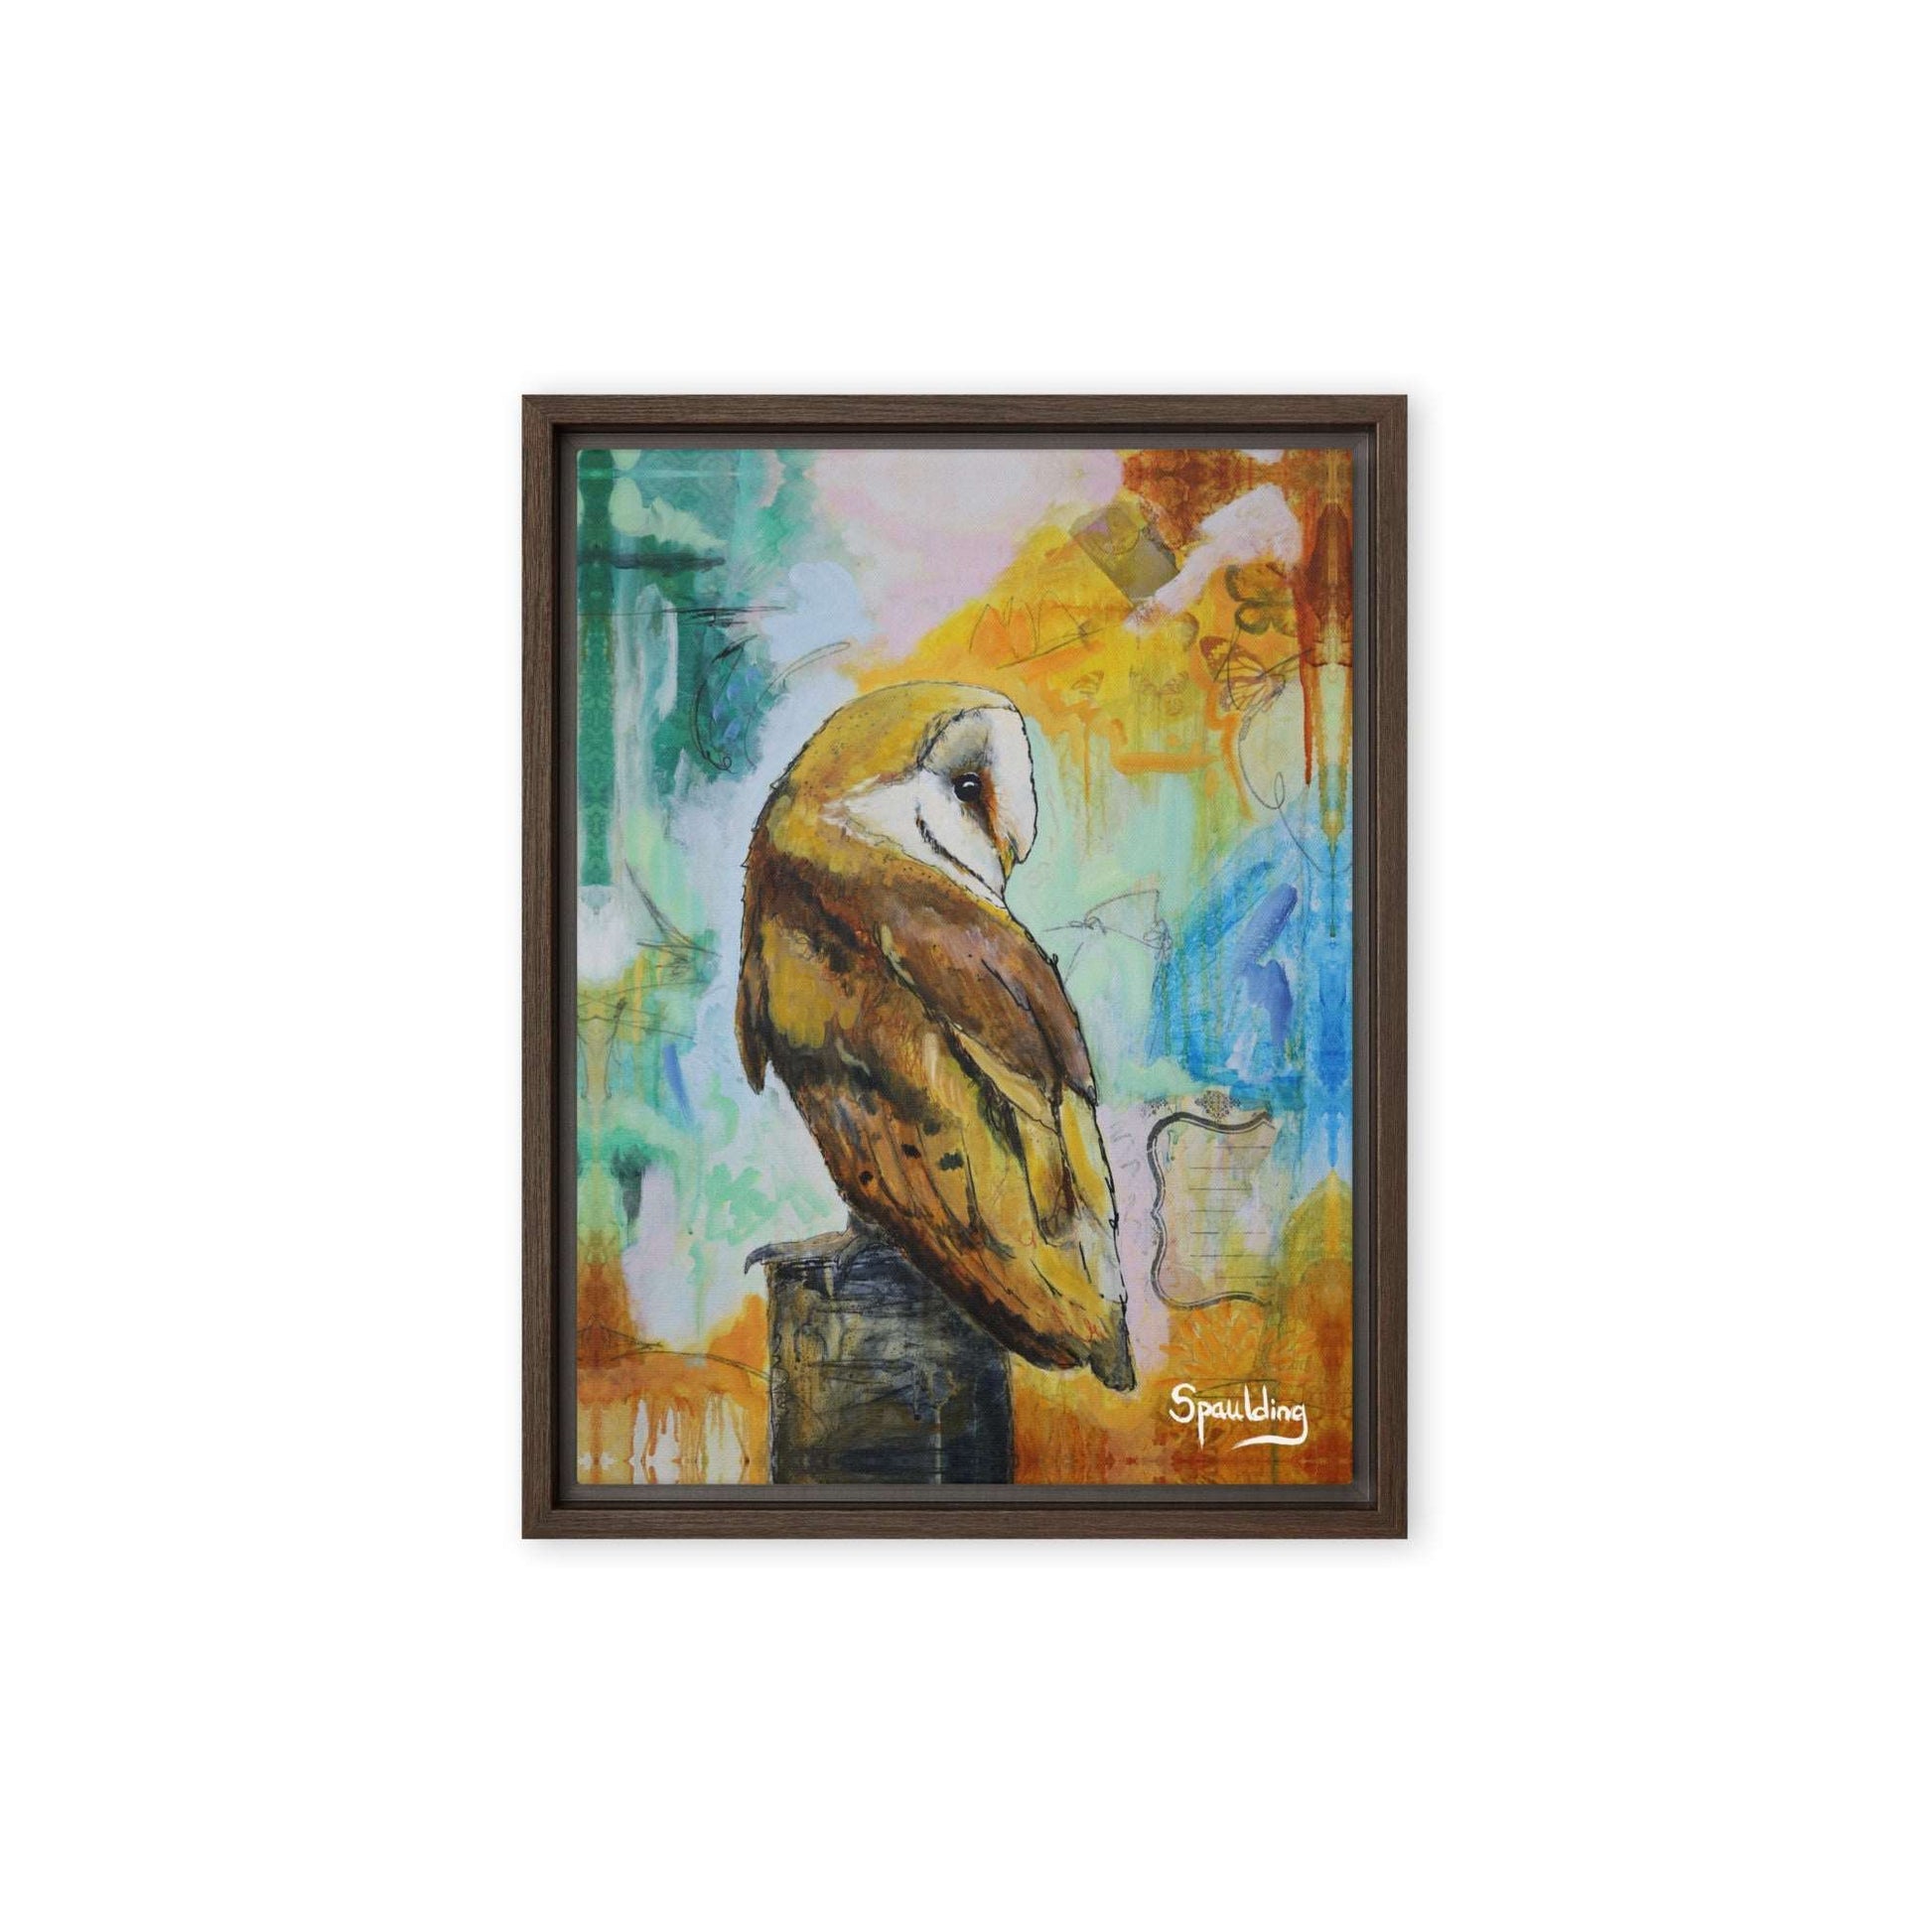 Framed canvas print of a barn owl on a tree stump with a background of teal, orange, blue and pinks.